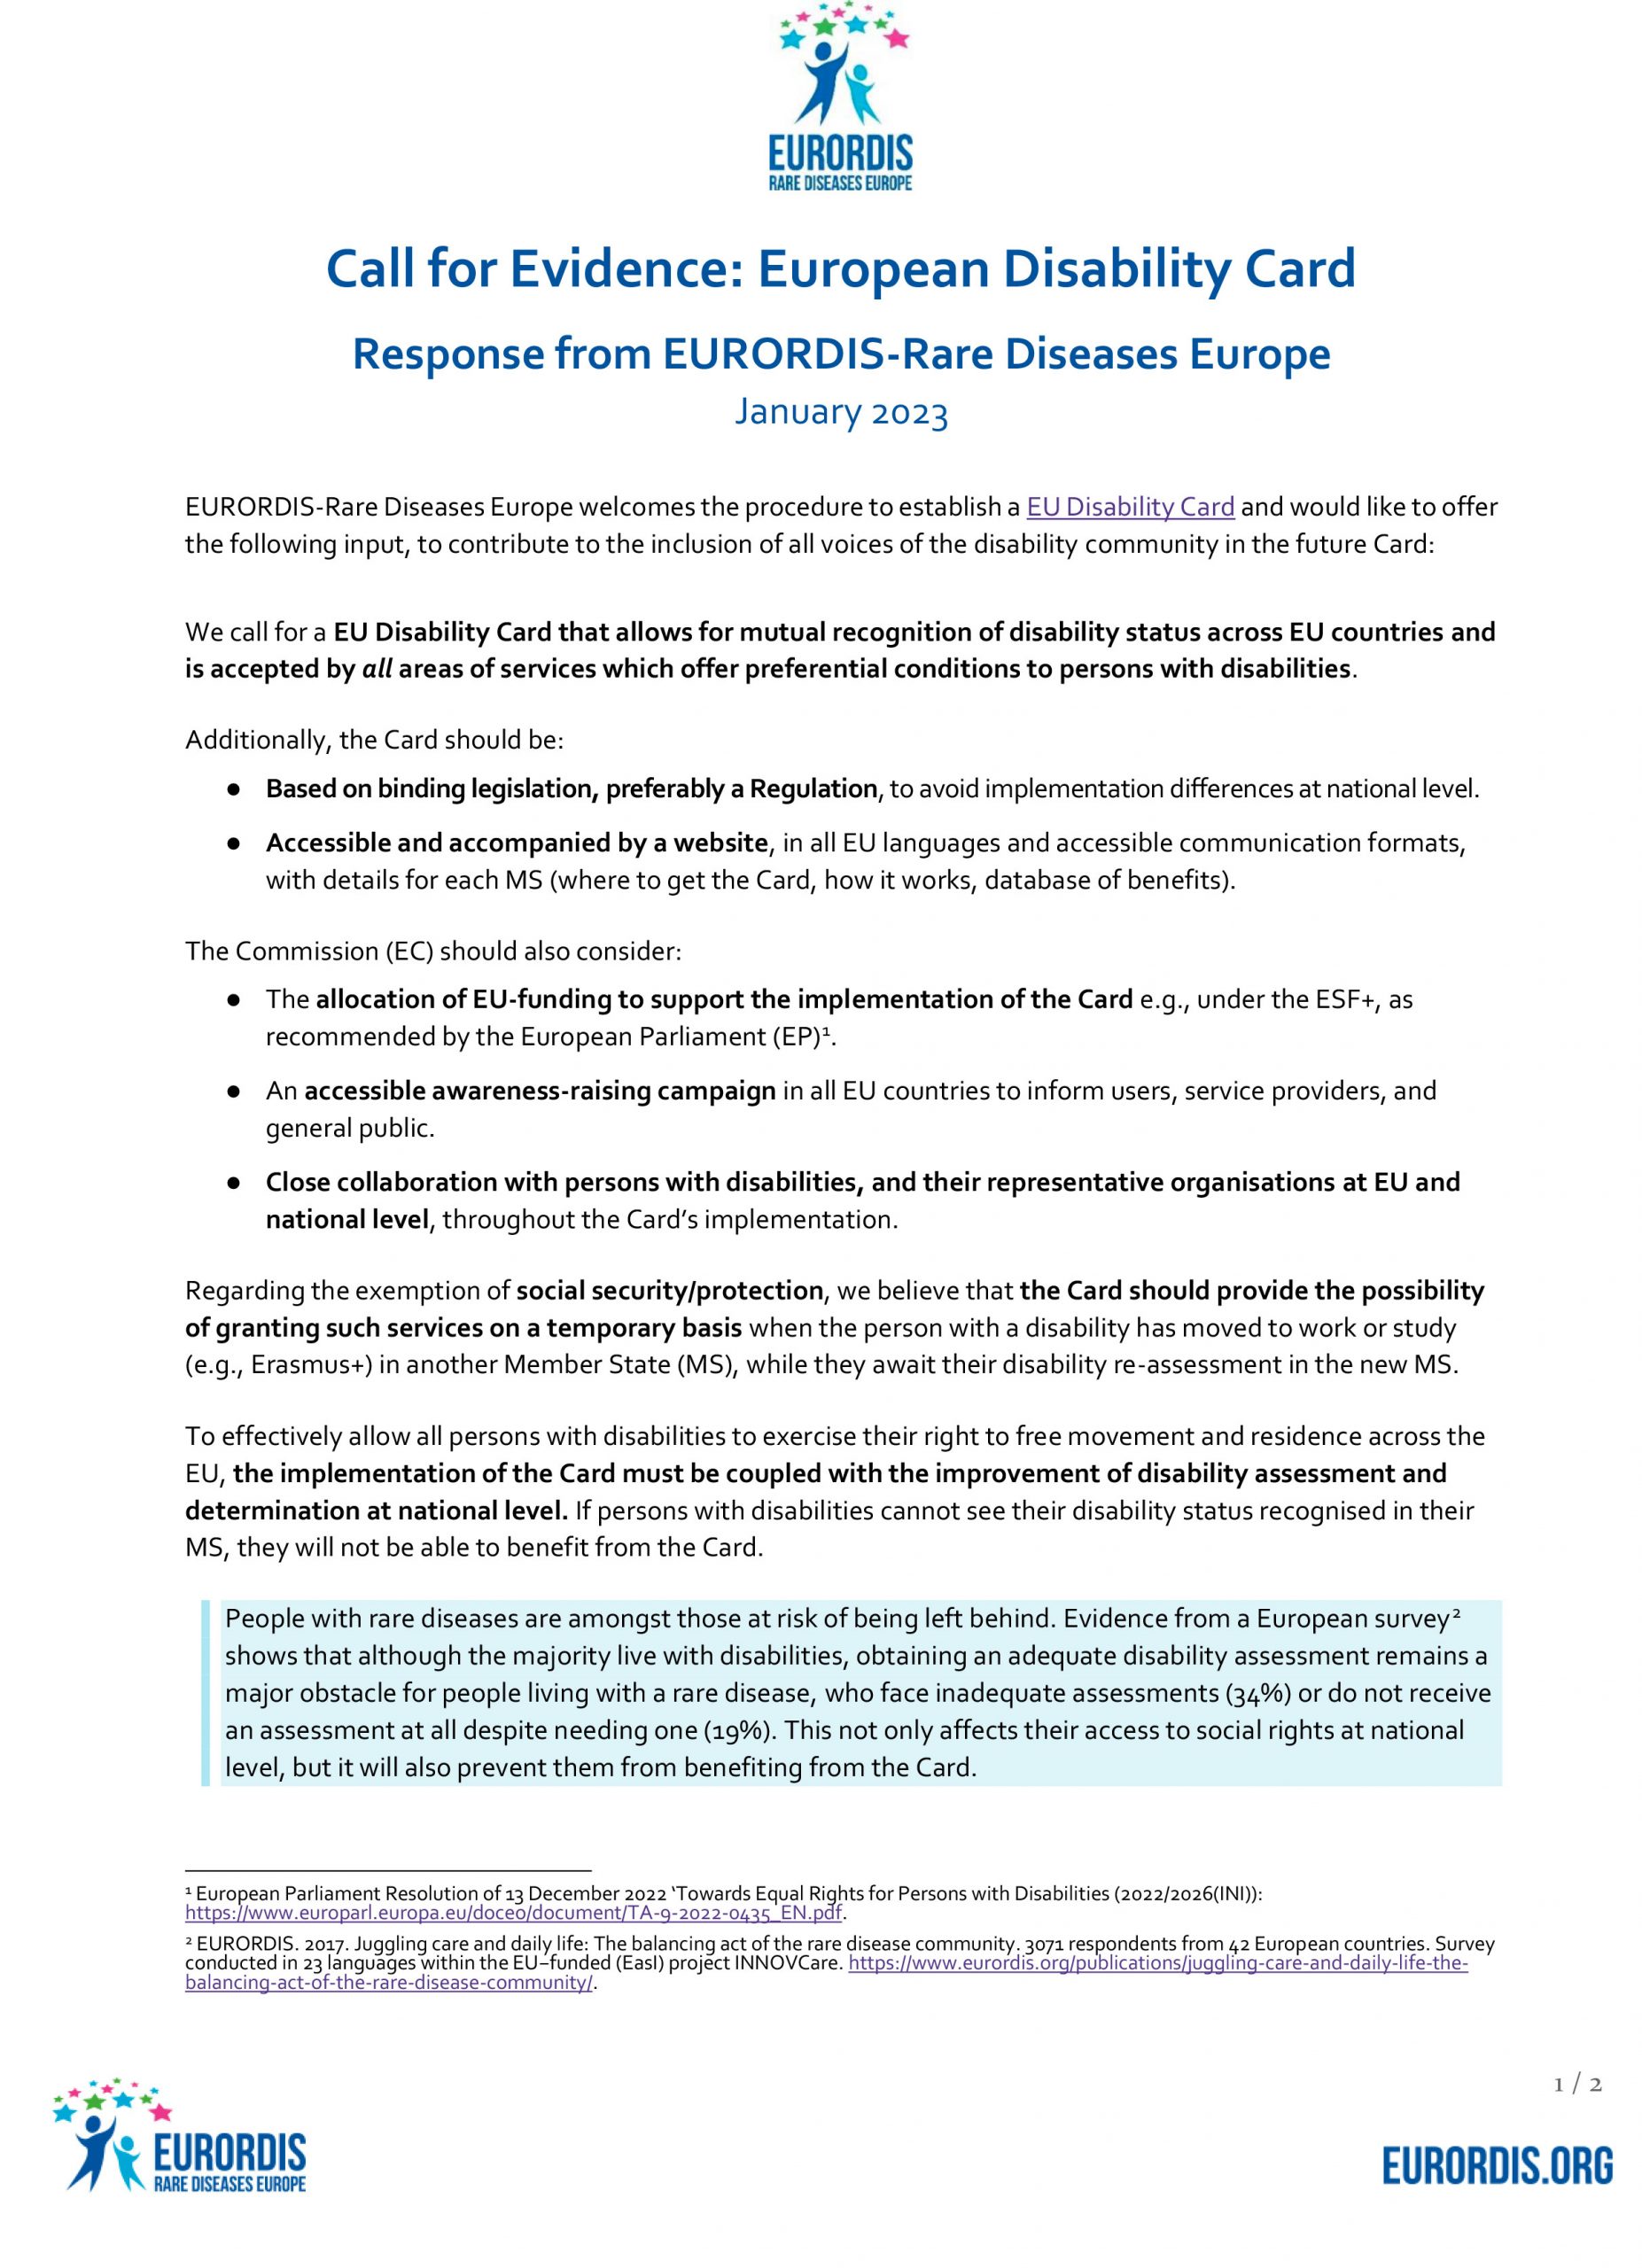 EURORDIS submission to the European Commission’s call for evidence on the EU Disability Card